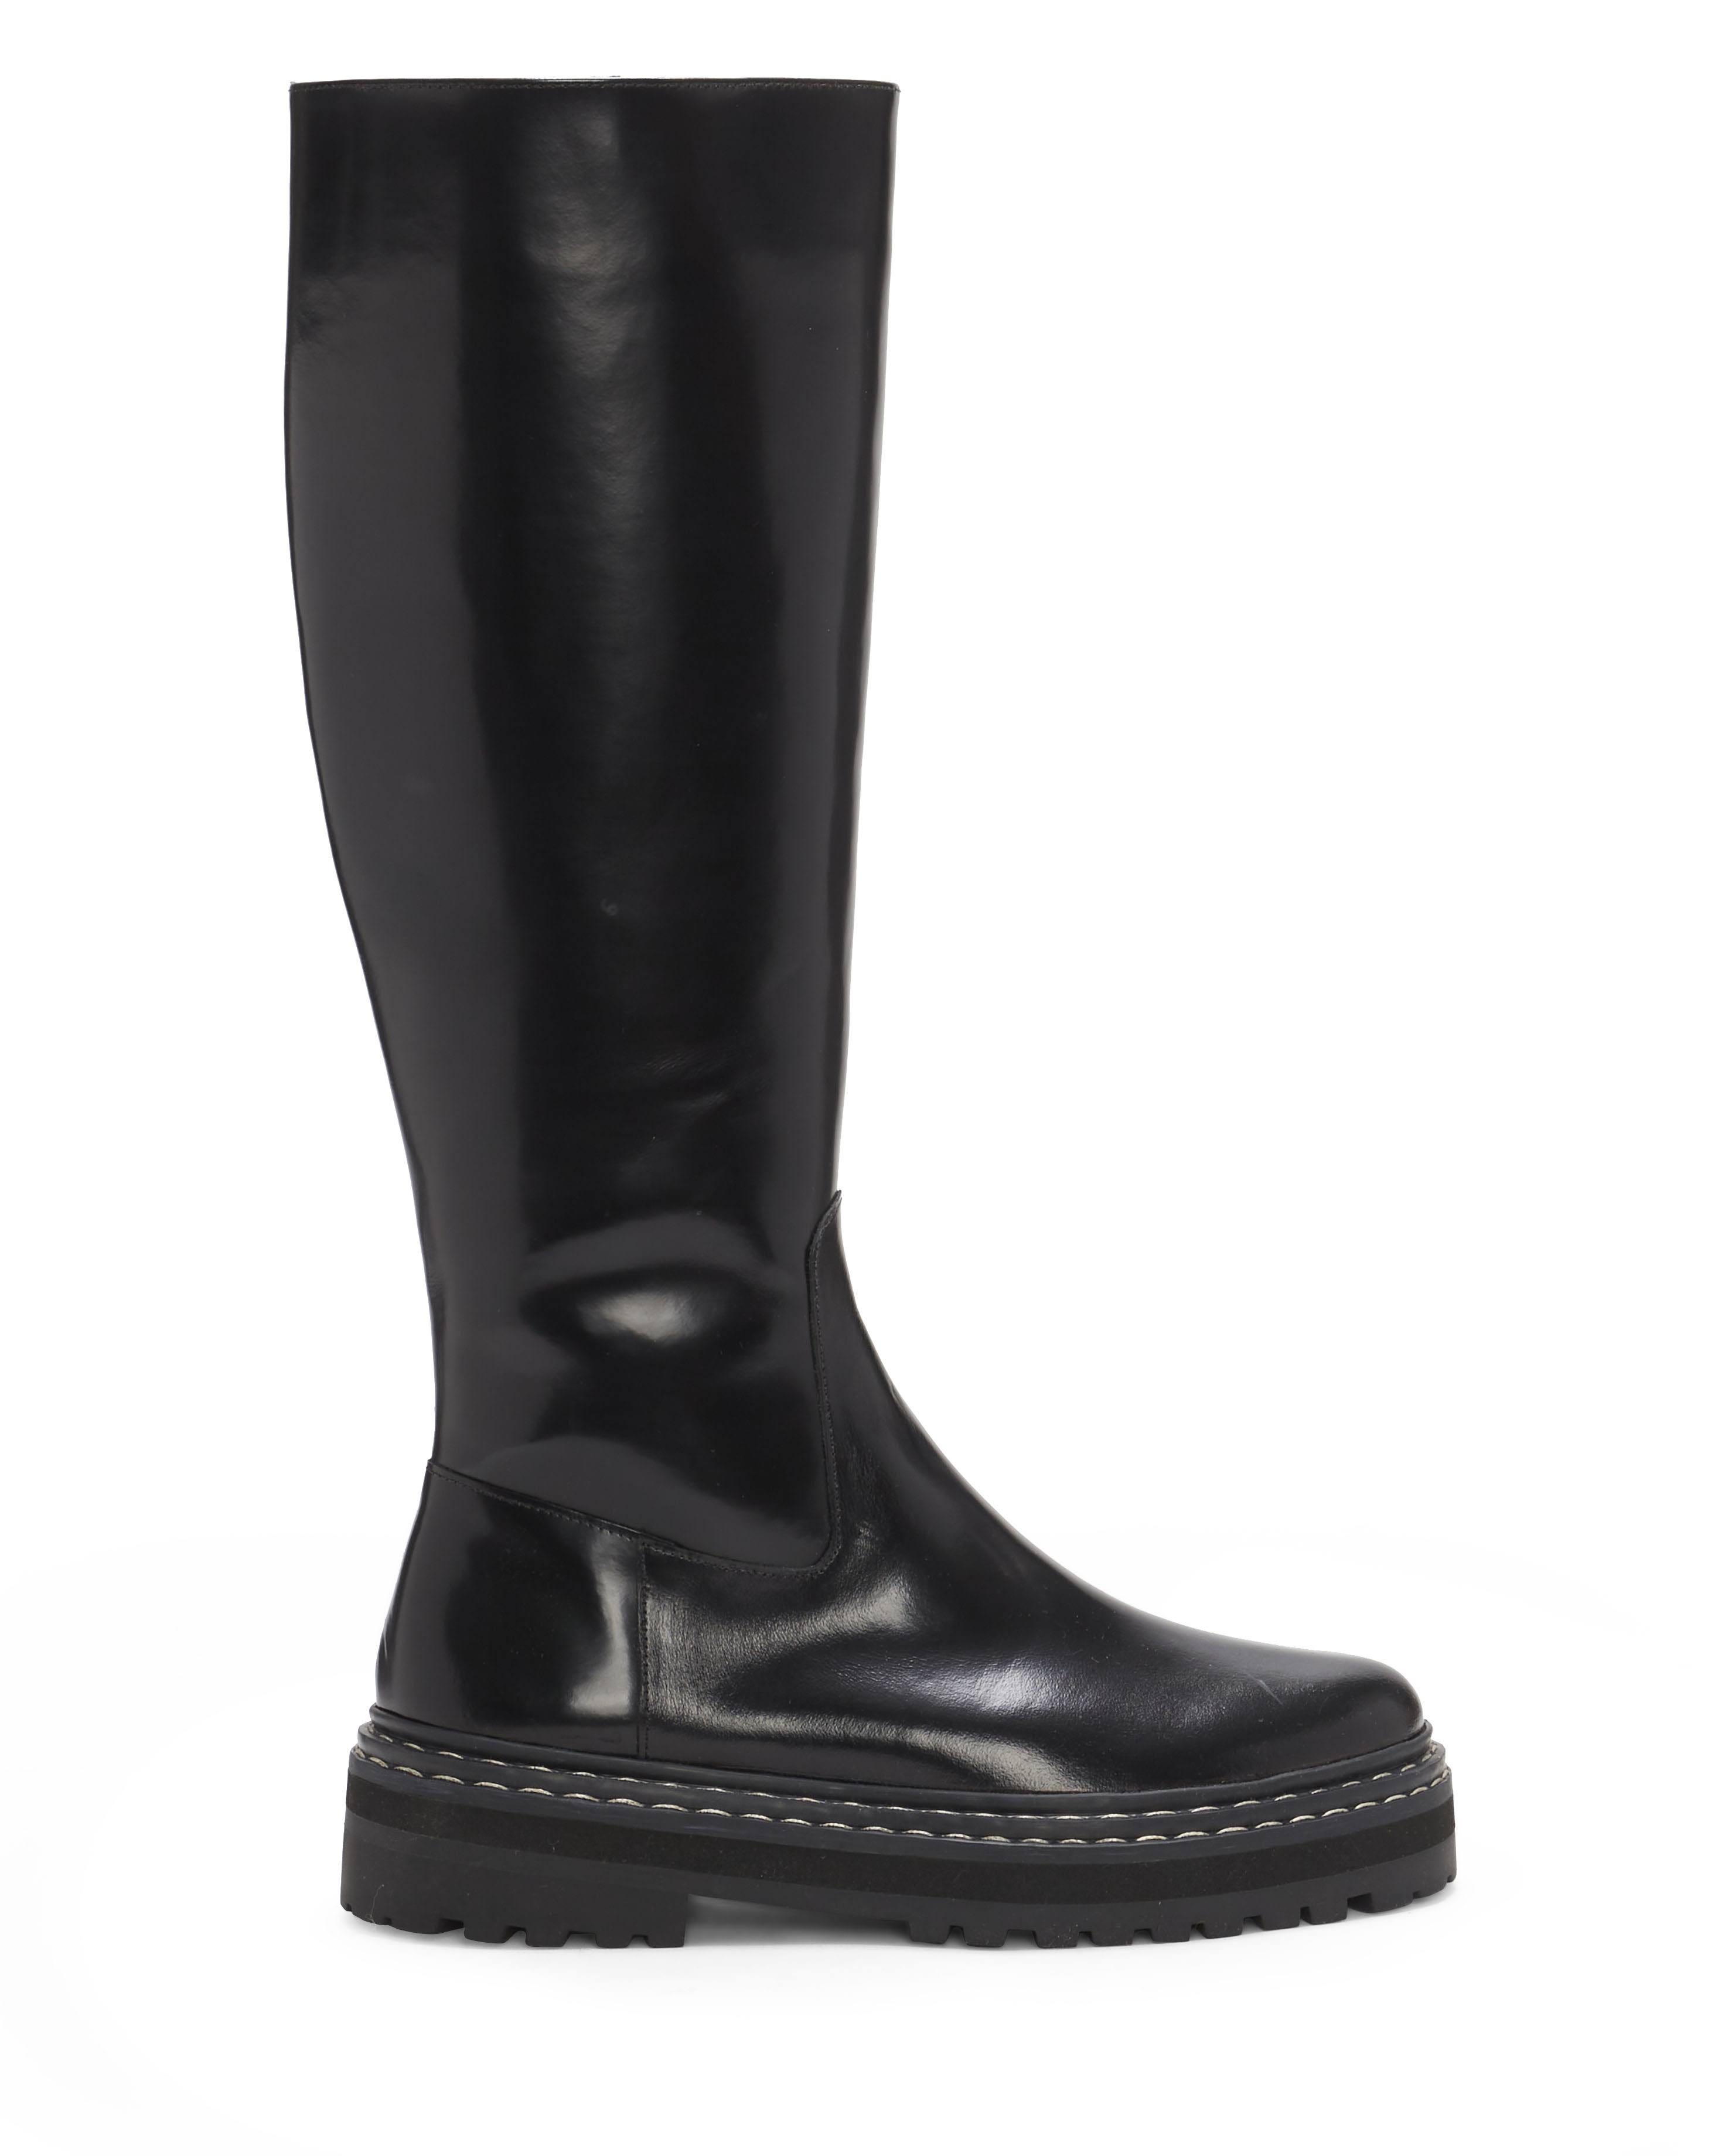 Stylish Leather Riding Boots by Vince Camuto | Image